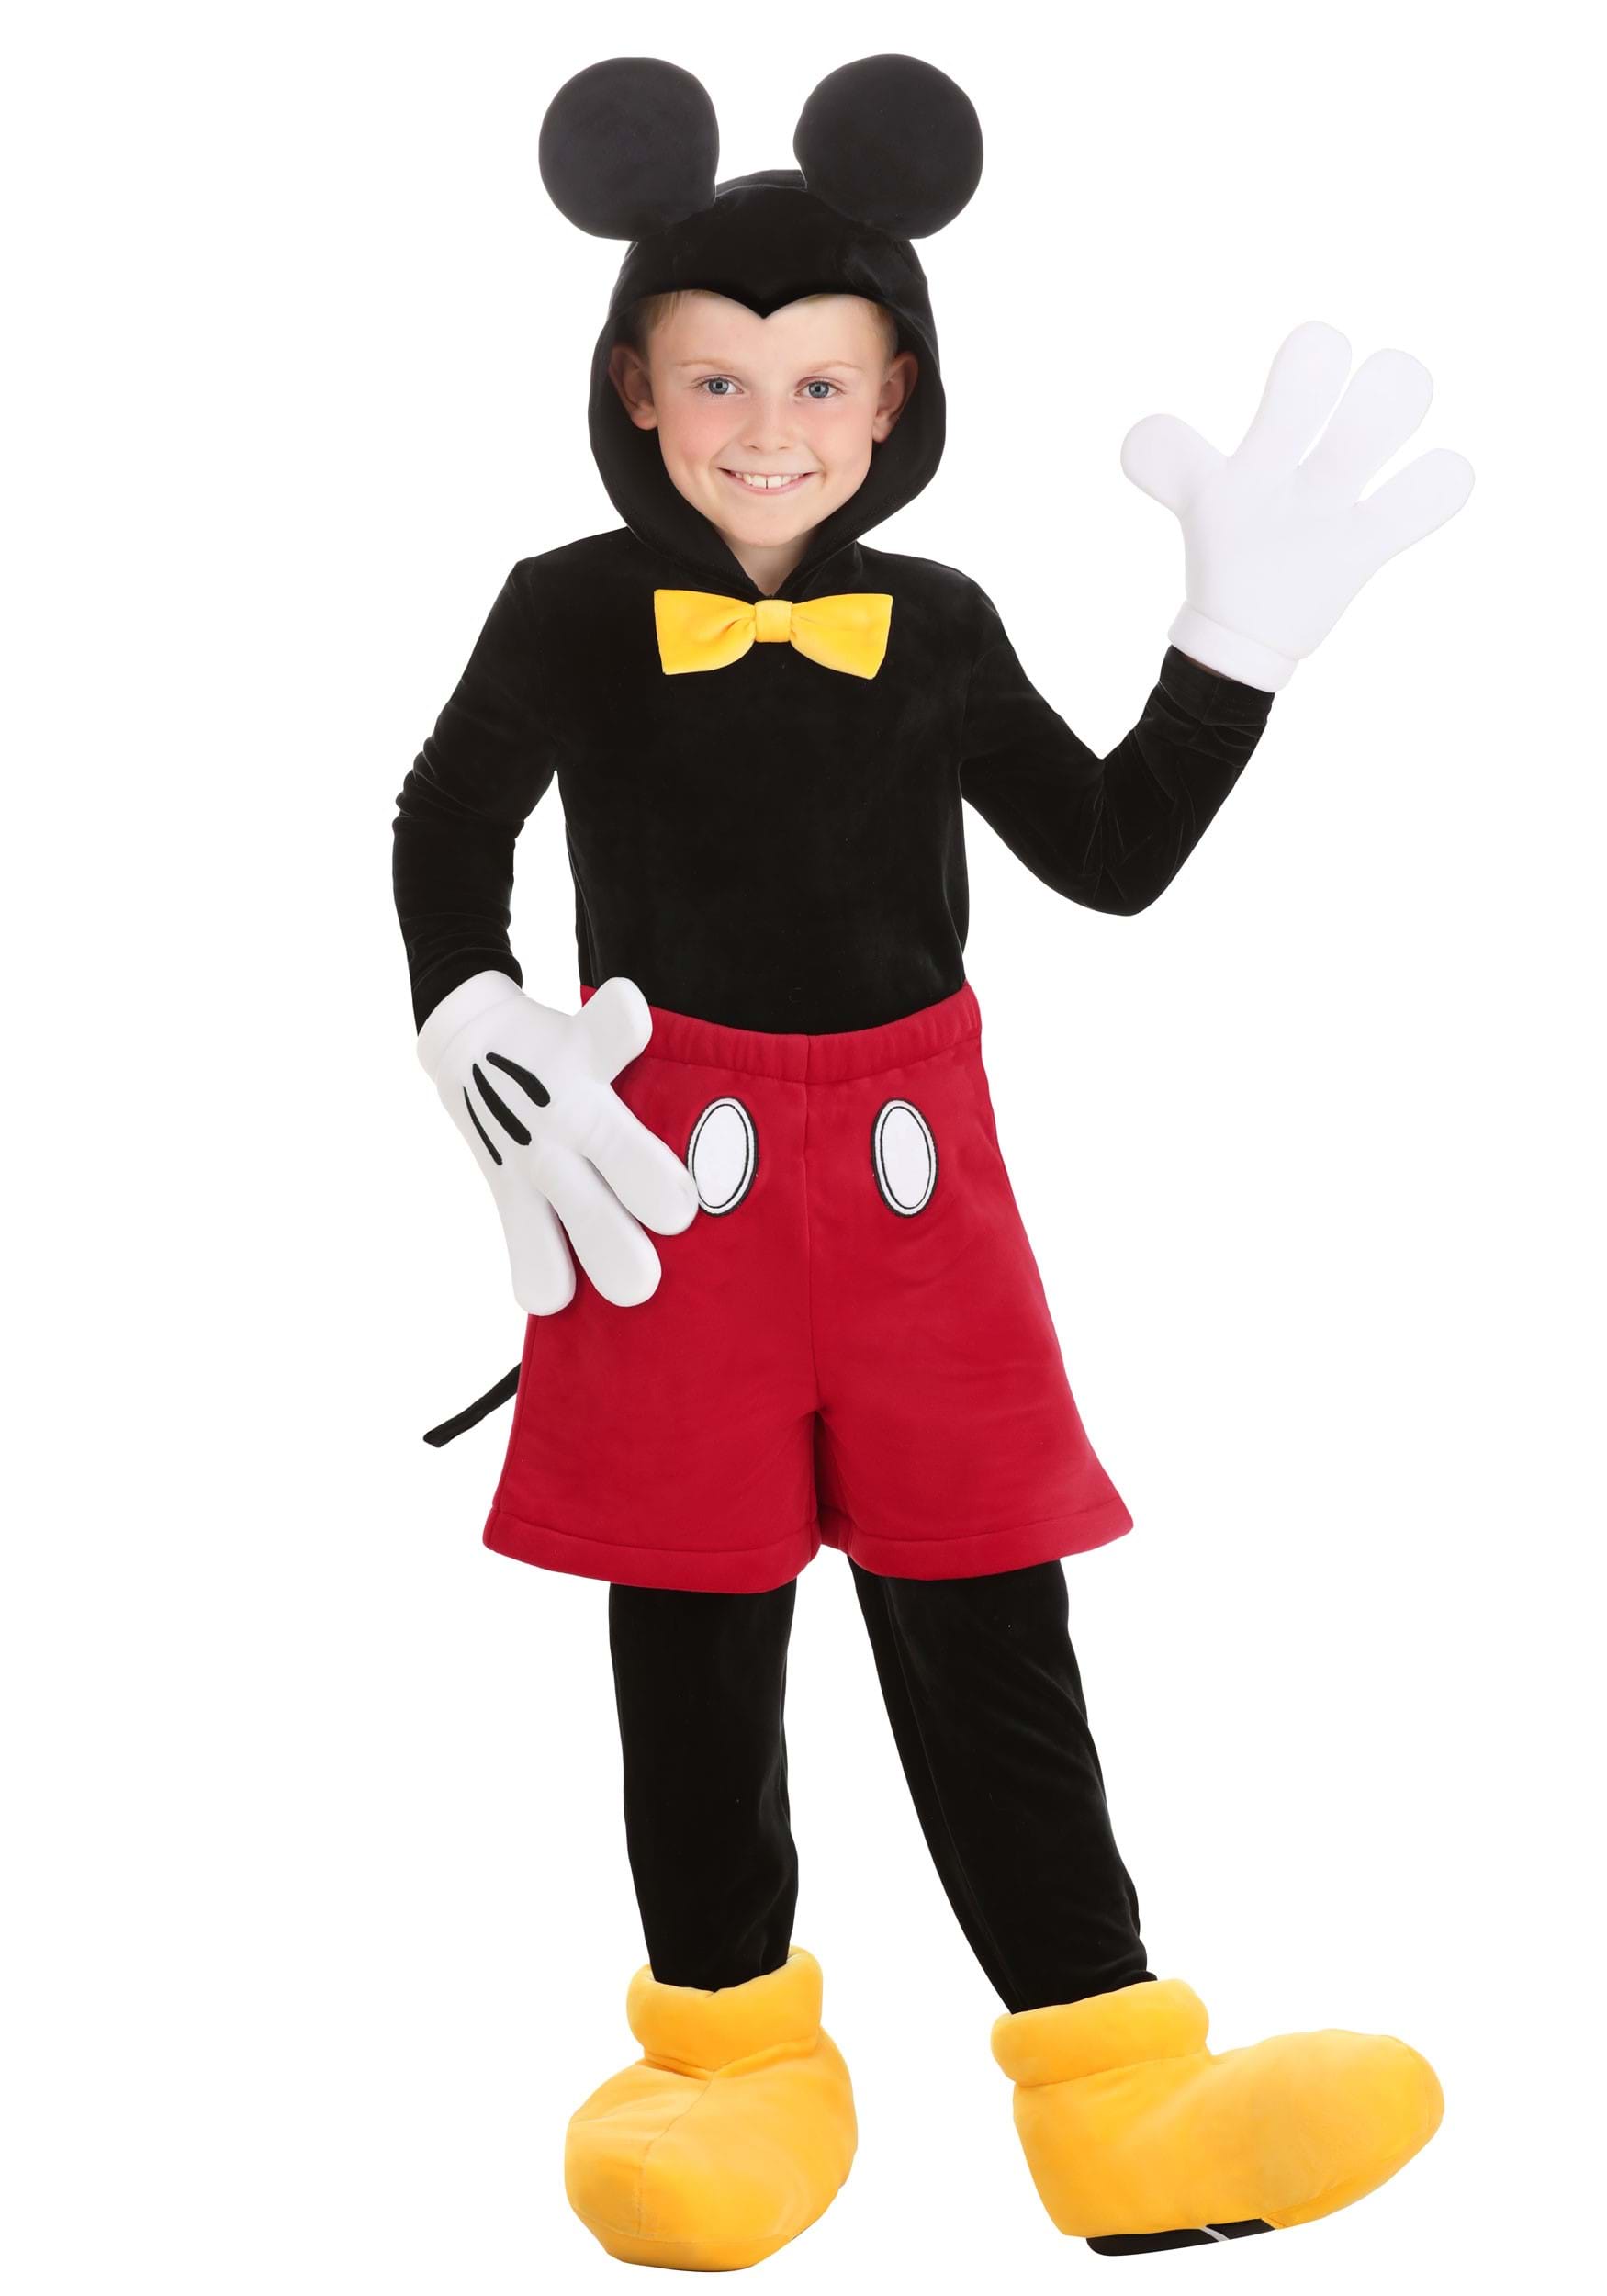 Photos - Fancy Dress Disney FUN Costumes Kid's Deluxe Mickey Mouse Costume Black/Red/Yellow FU 